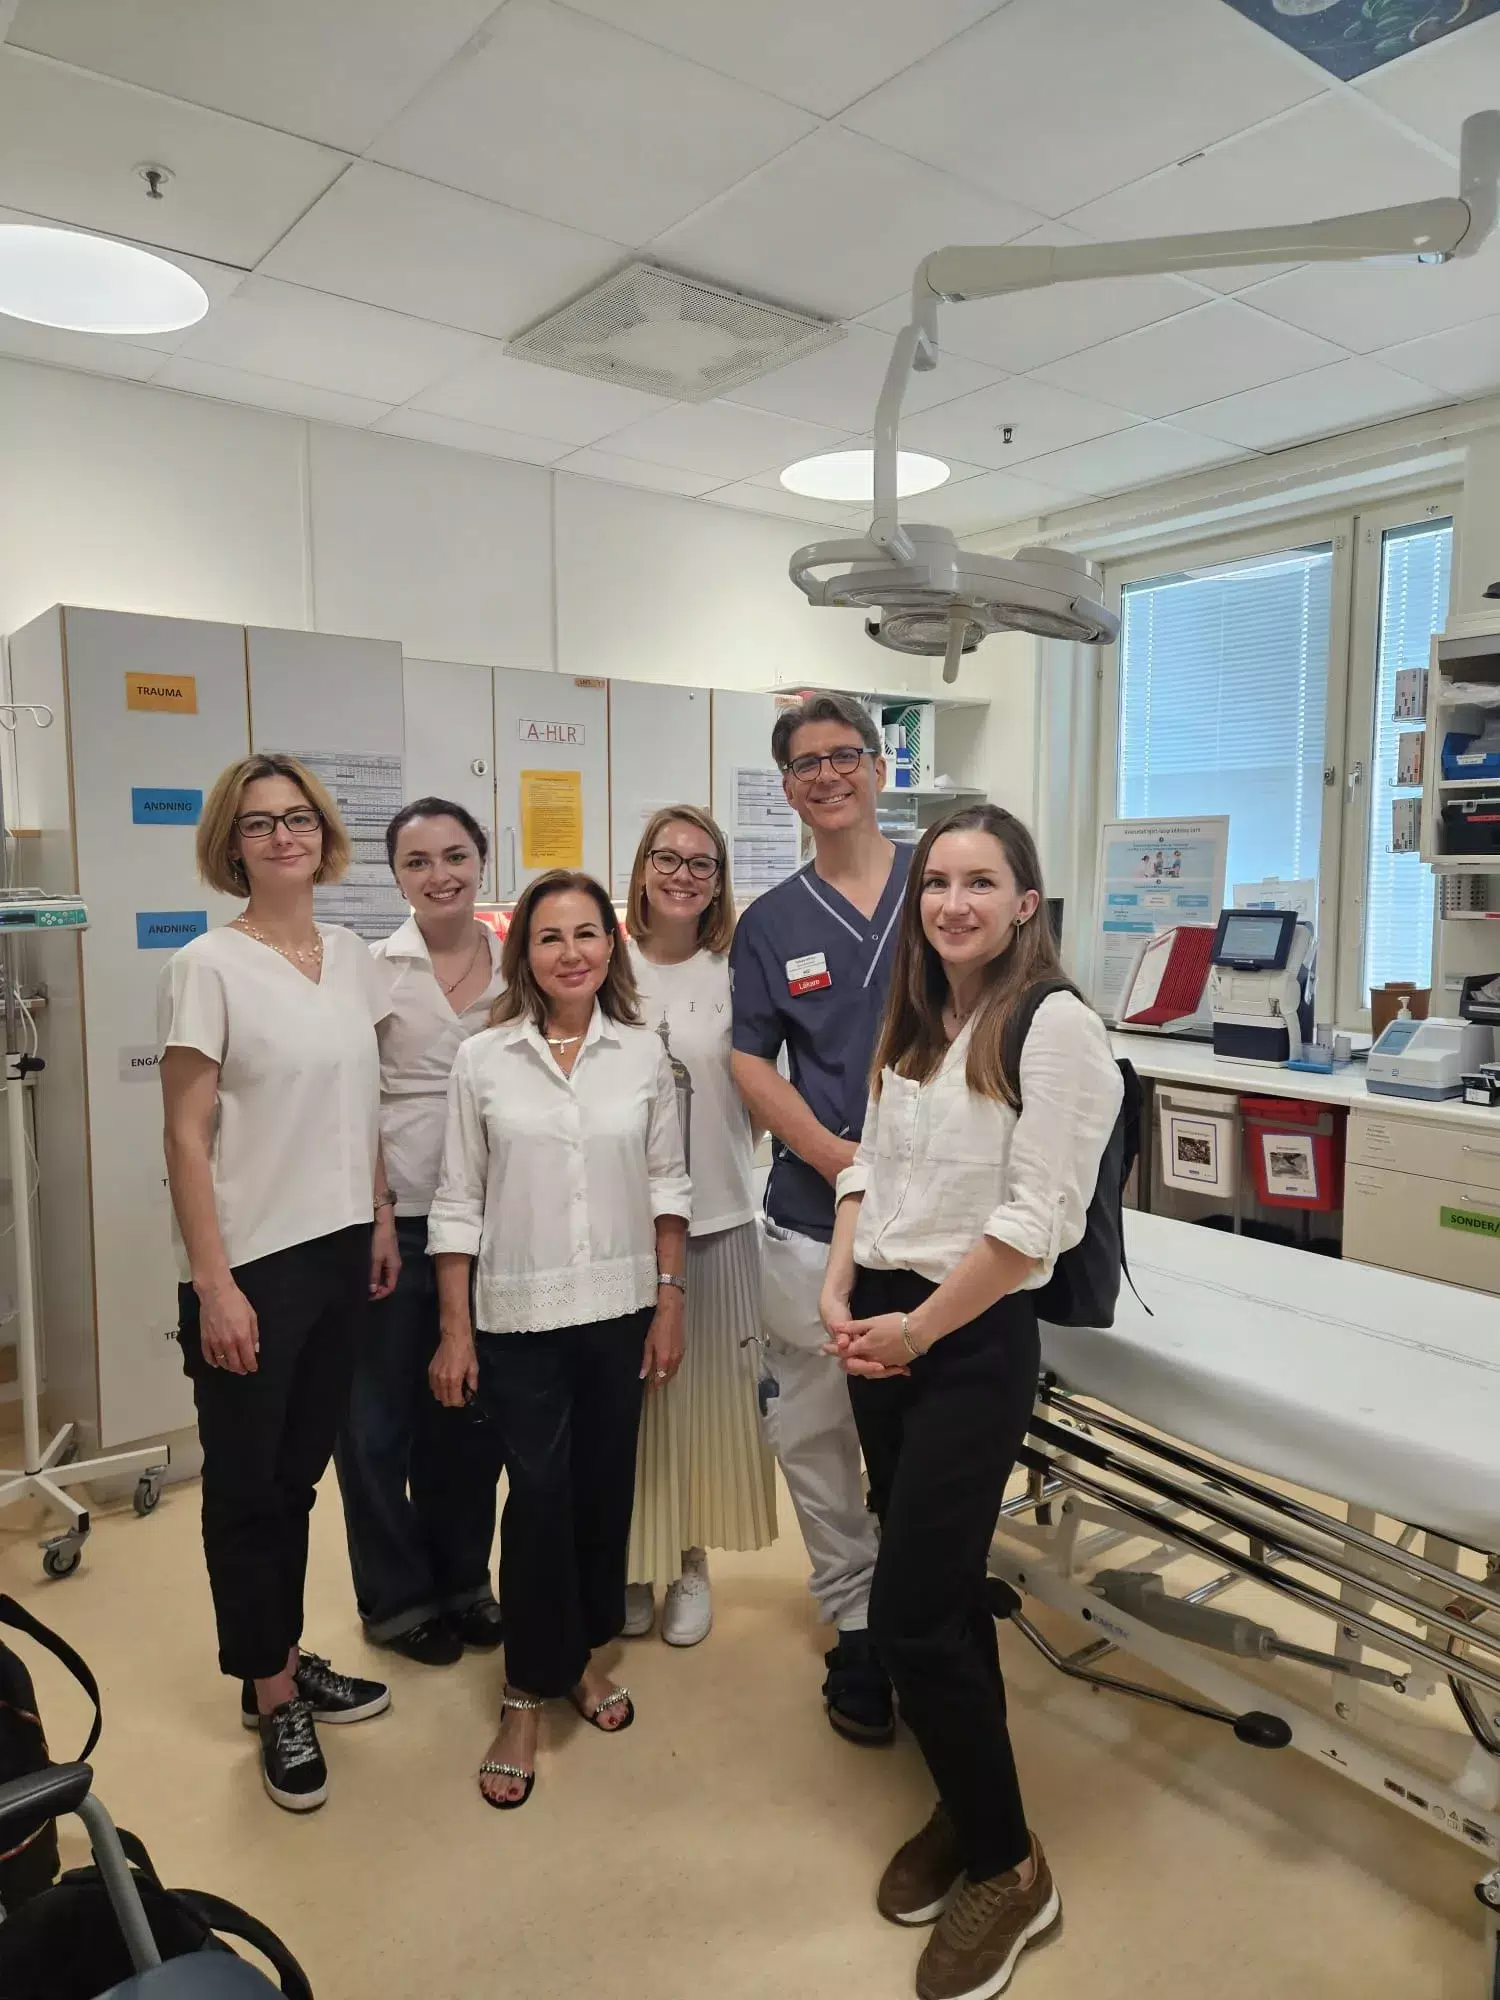 Visit to Sachsska Children's and Youth Hospital. Tobias LAfvén in hospital scrubs together with the four researchers from Ukraine.